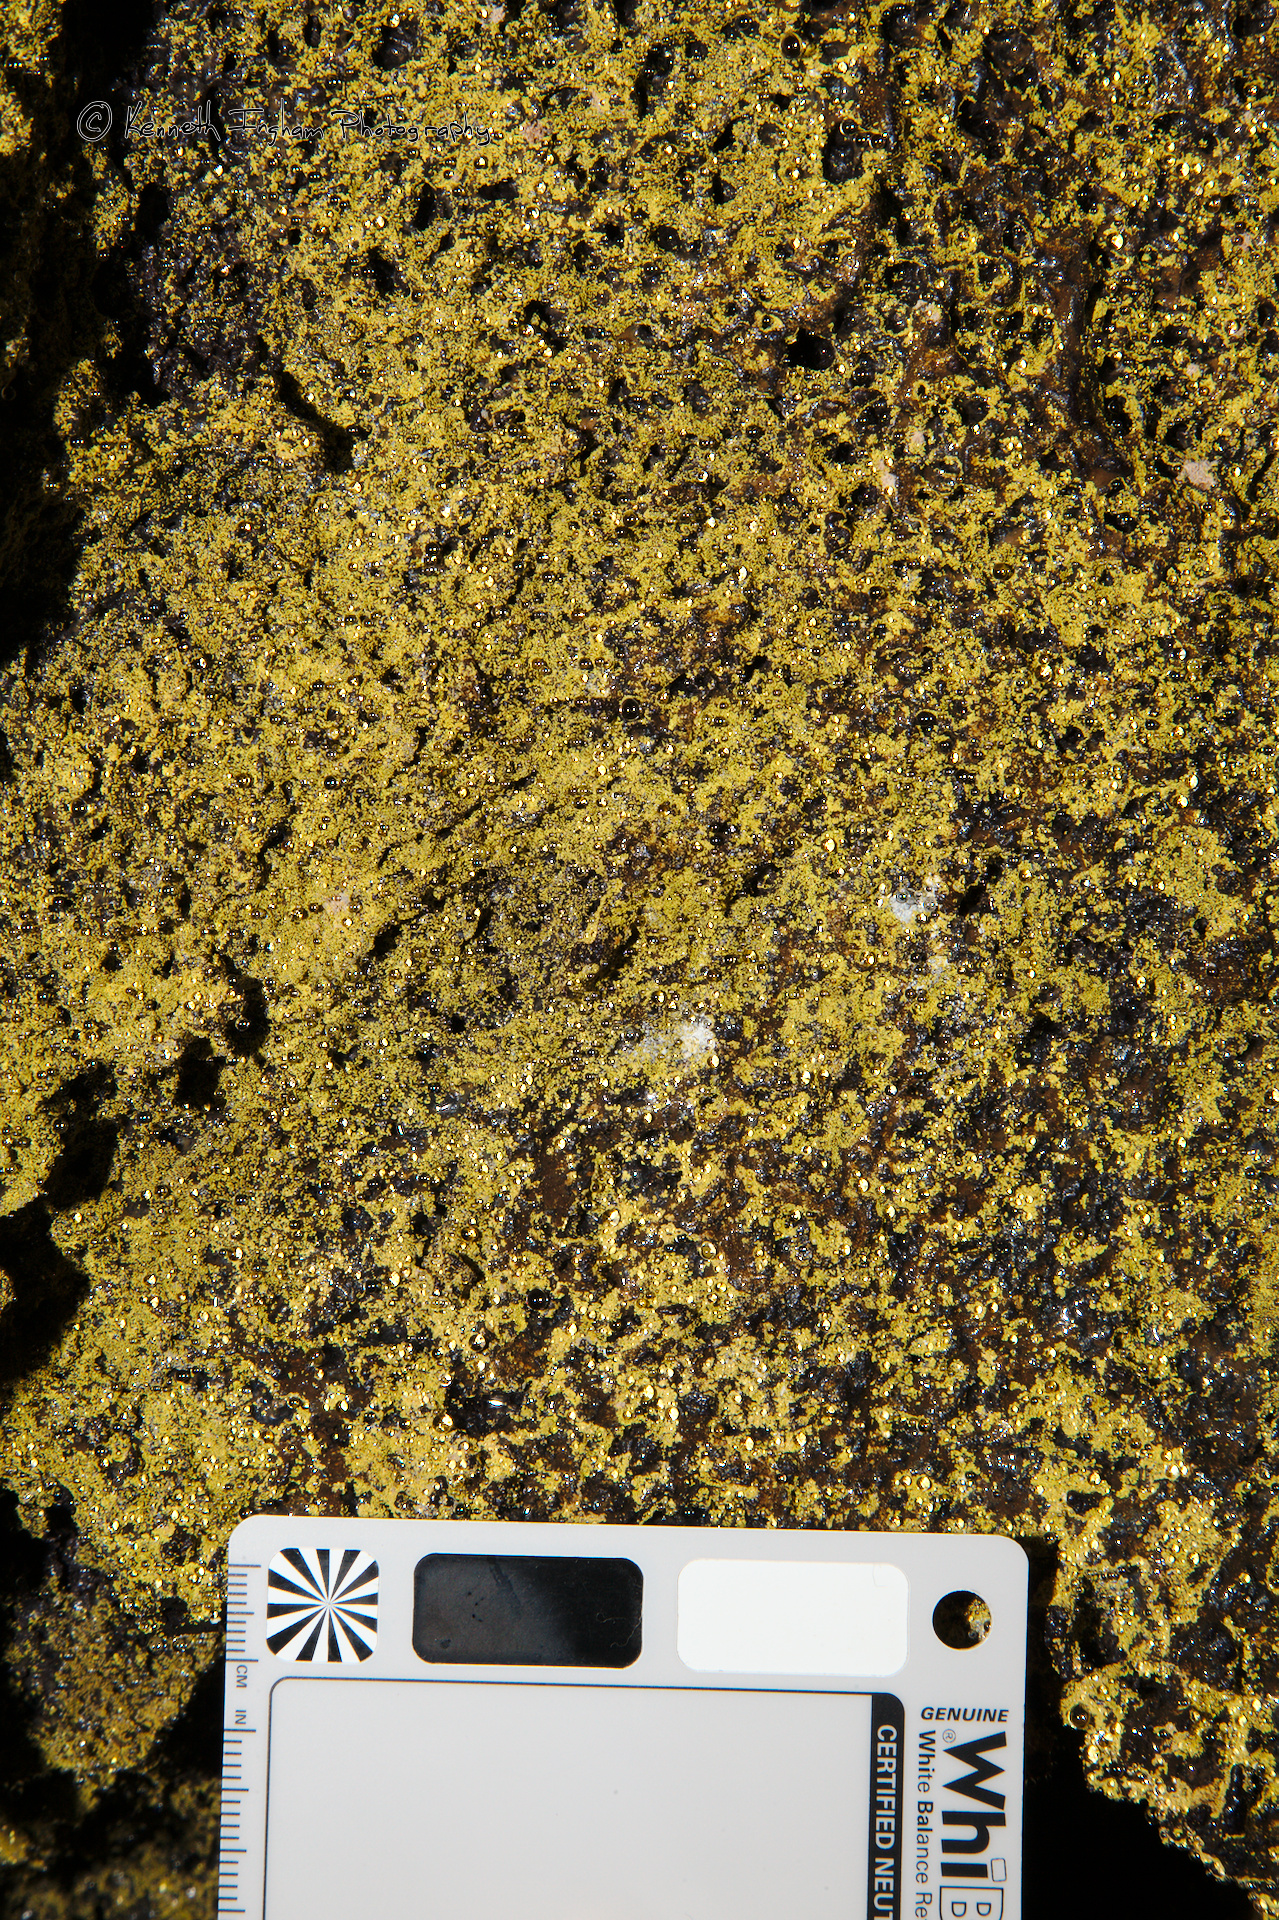 Yellow microbial colonies